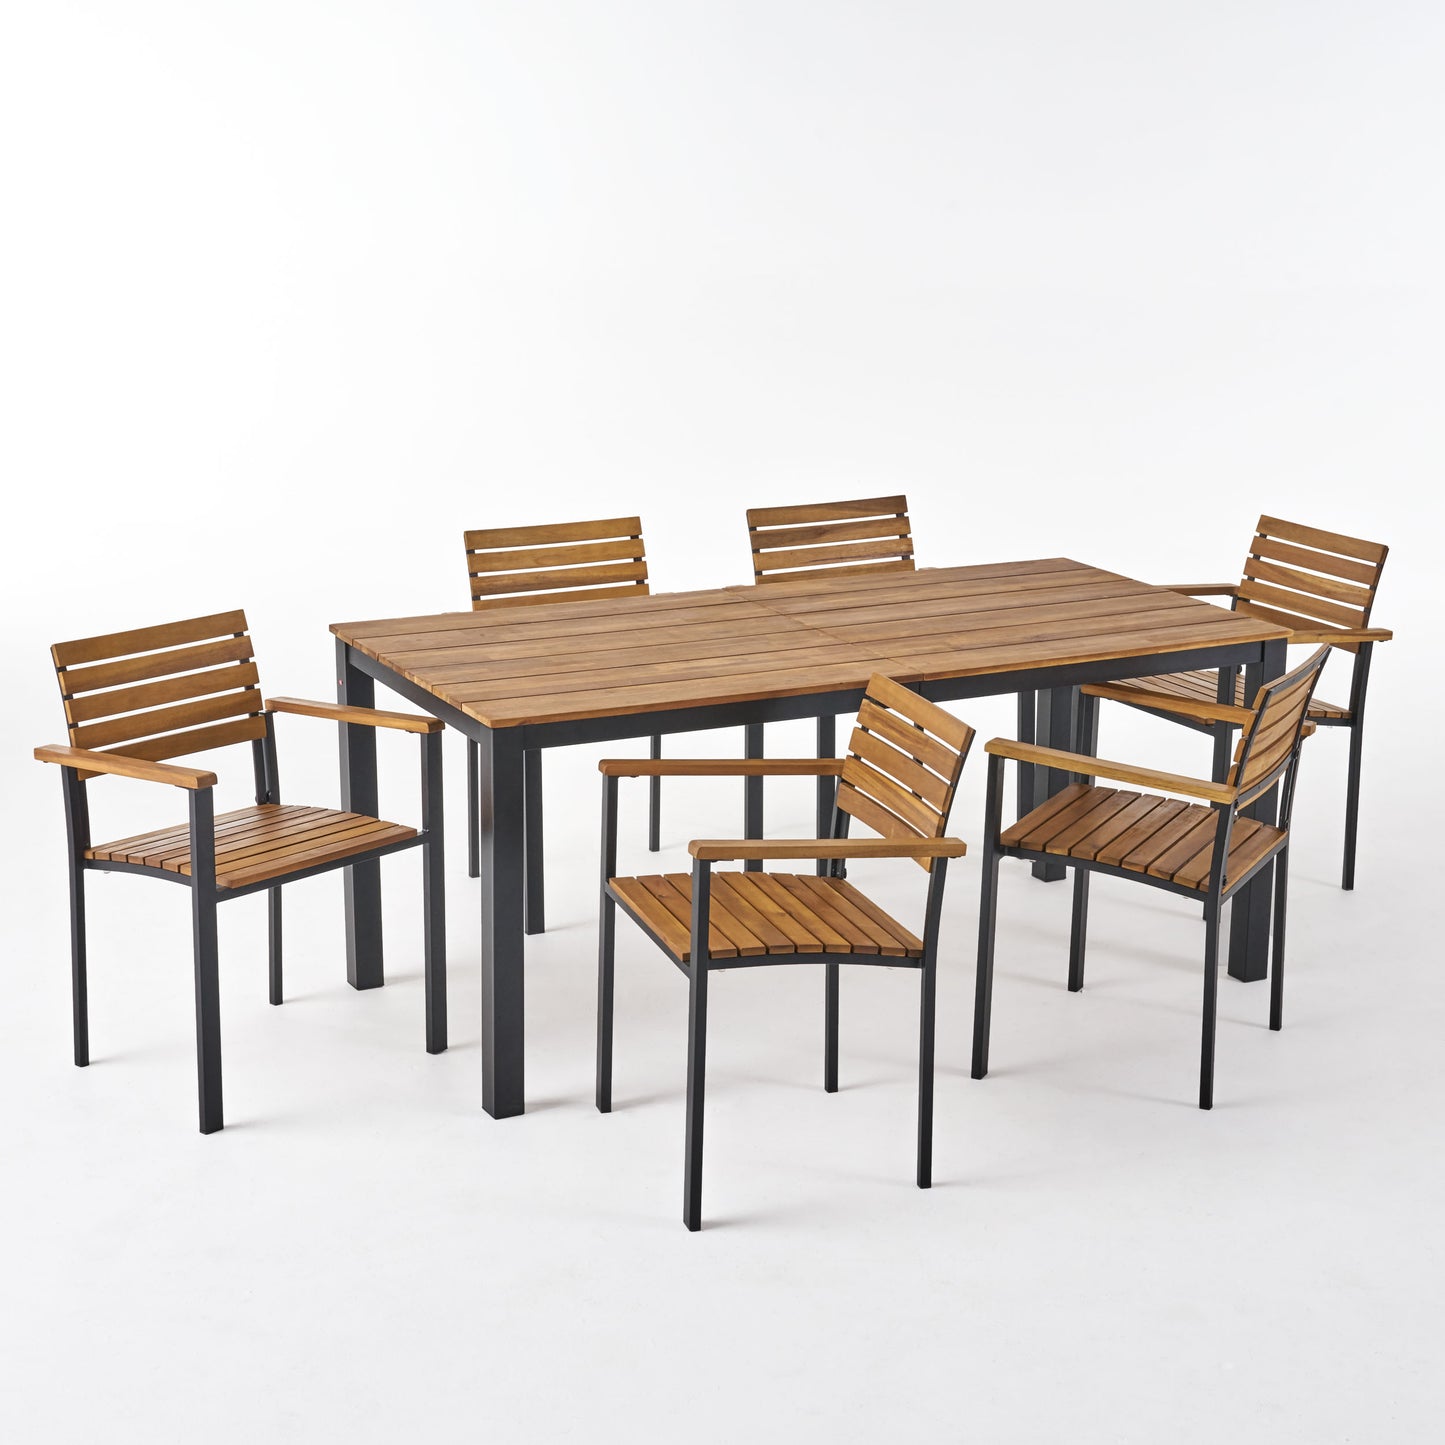 Veromca Outdoor 6 Seater Wood and Iron Dining Set